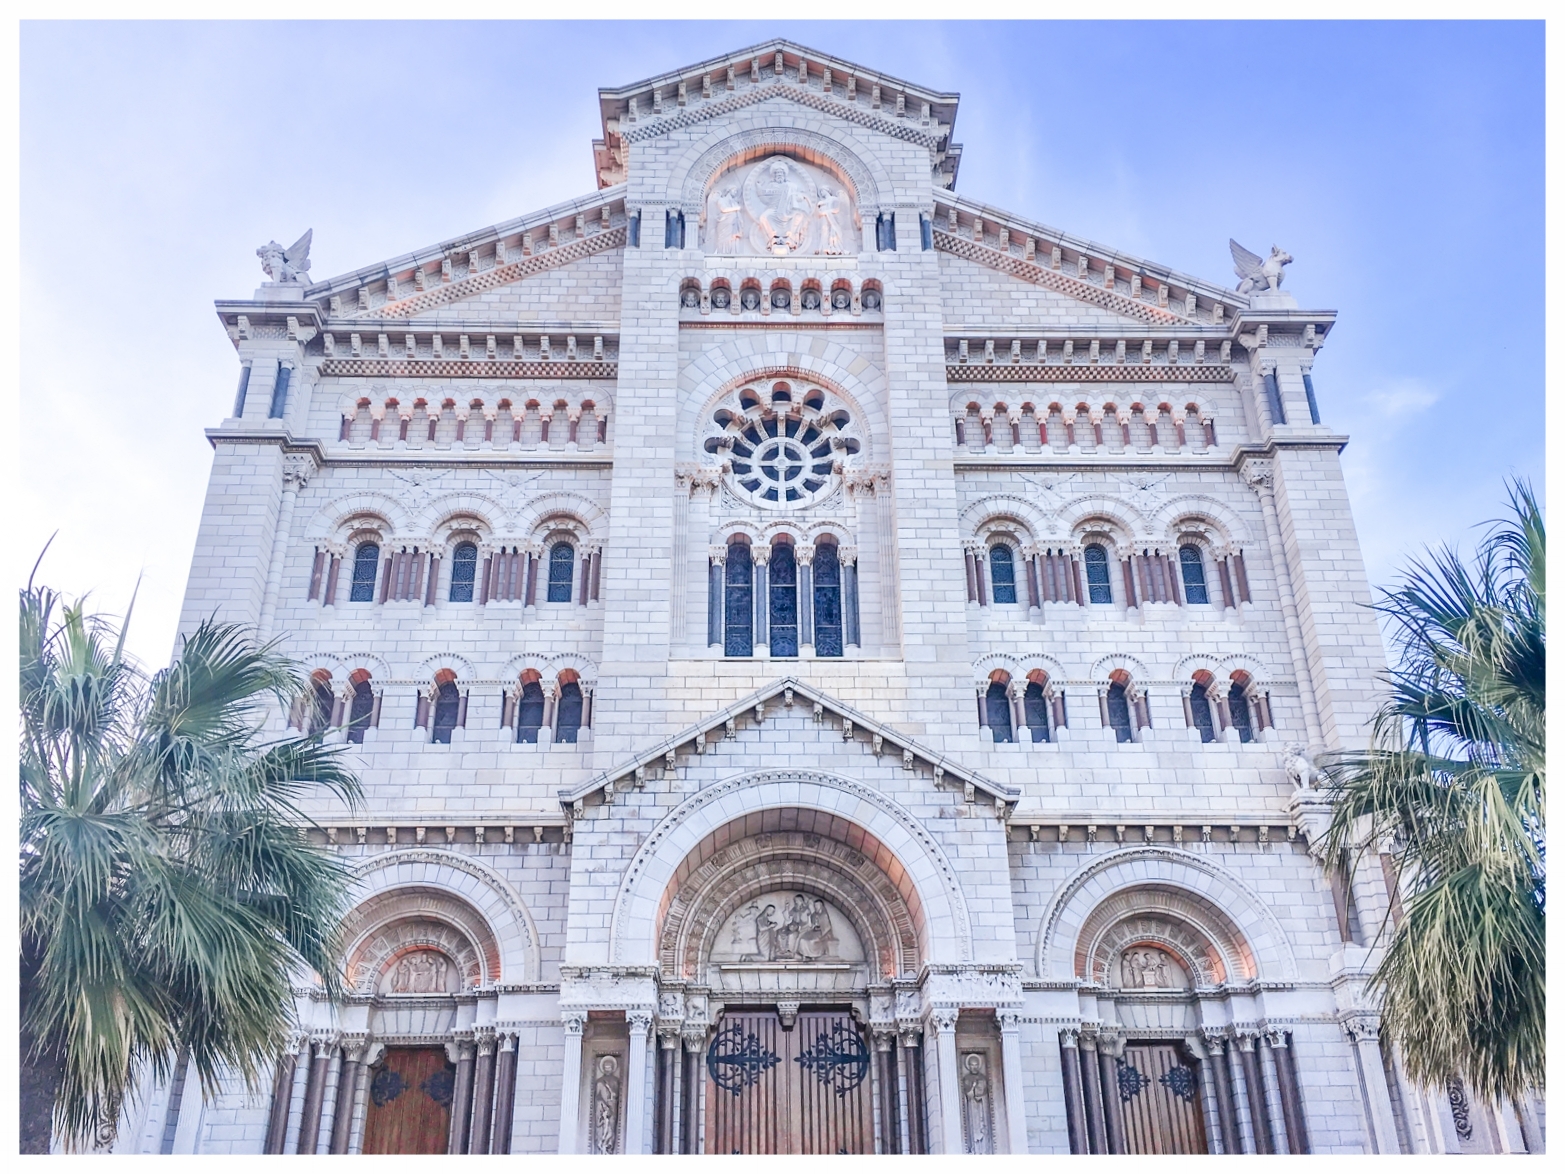 How to See Monaco in One Day | A Travel Guide | Things to do in Monte Carlo and Monaco-Ville | If you only have one day to spend in this glamorous city-state, this is your guide to all the sights, shopping and food in Monaco. | Place du Casino, Gard…